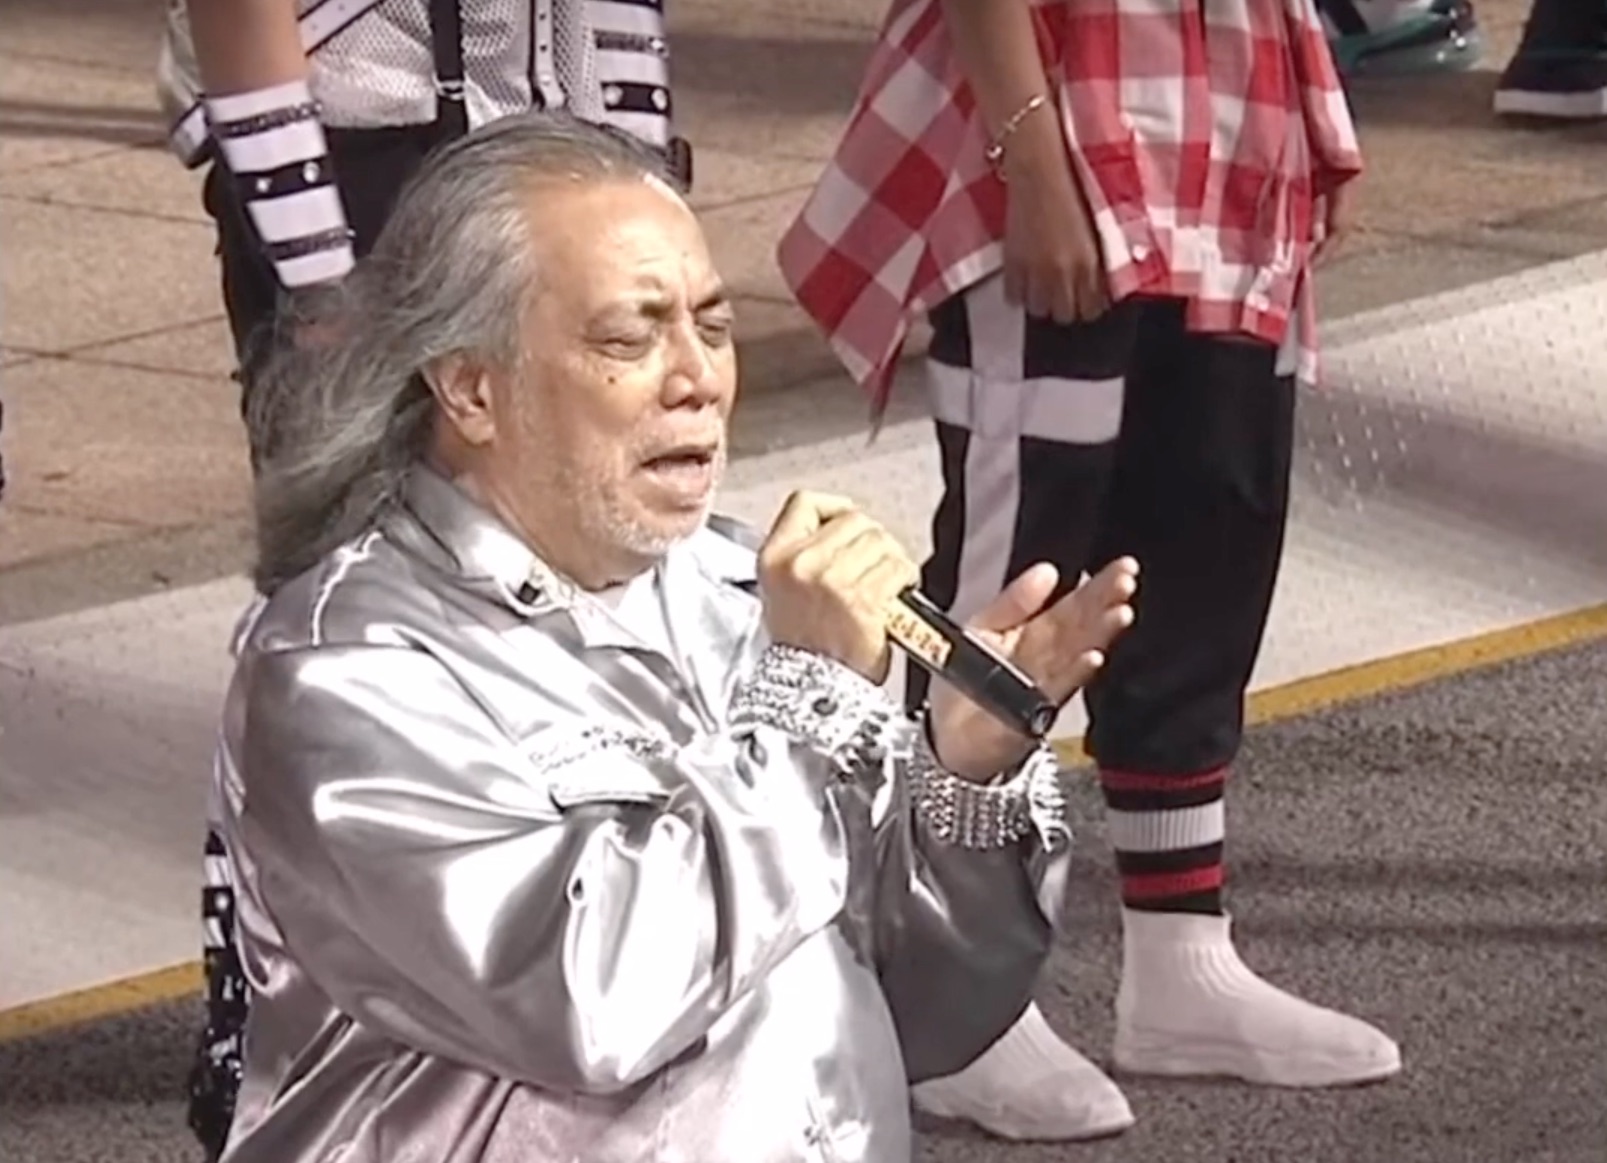 The veteran singer became the target of racist comments following his downtempo version of Singaporeu00e2u20acu2122s national anthem. u00e2u20acu201d Screengrab from YouTube